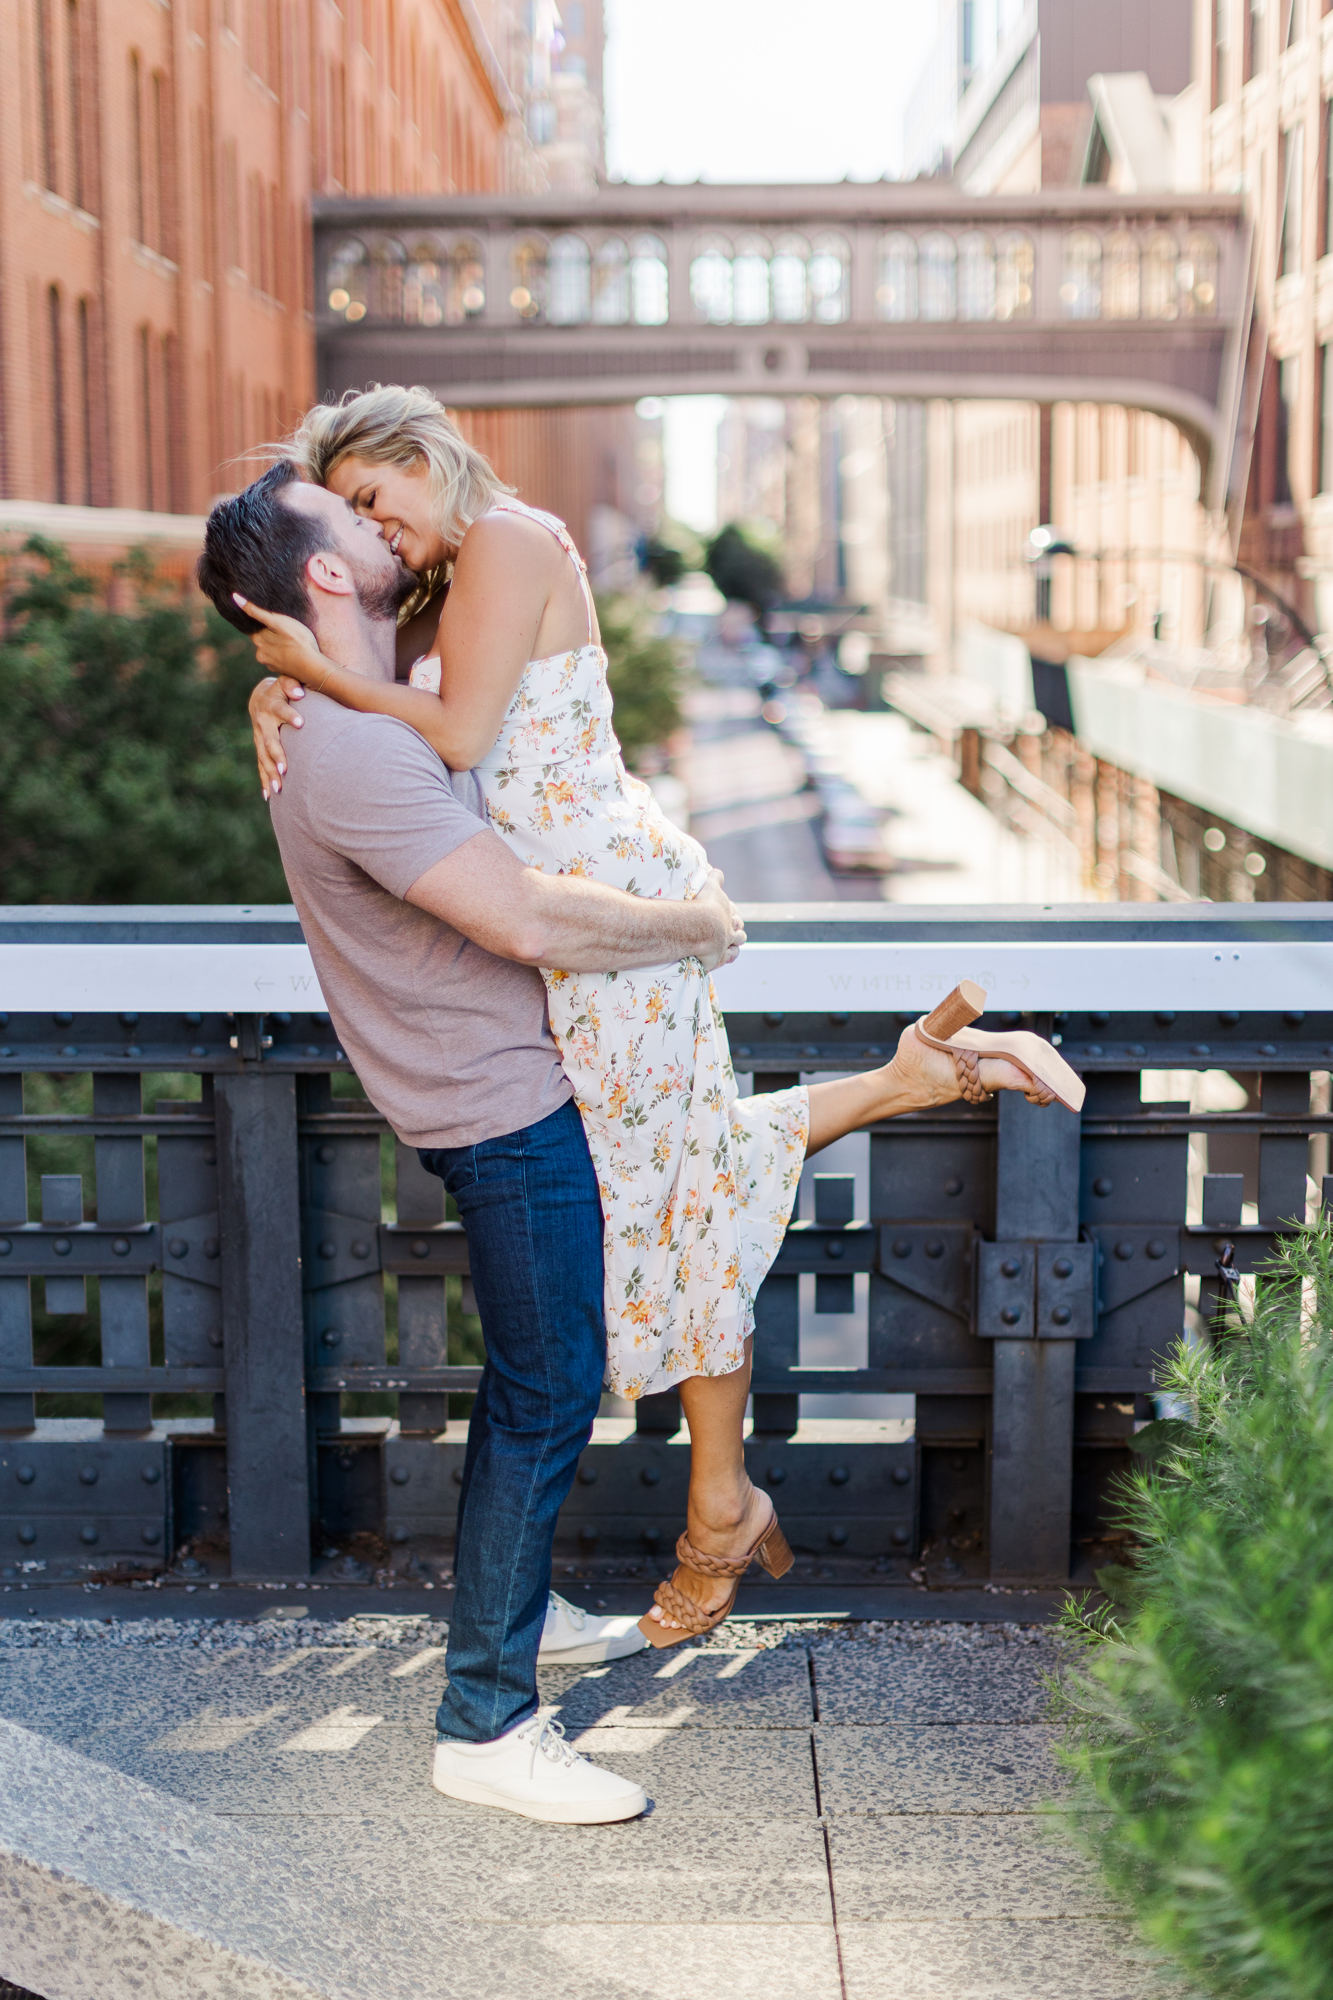 Perfect Summer Engagement Shoot on the High Line